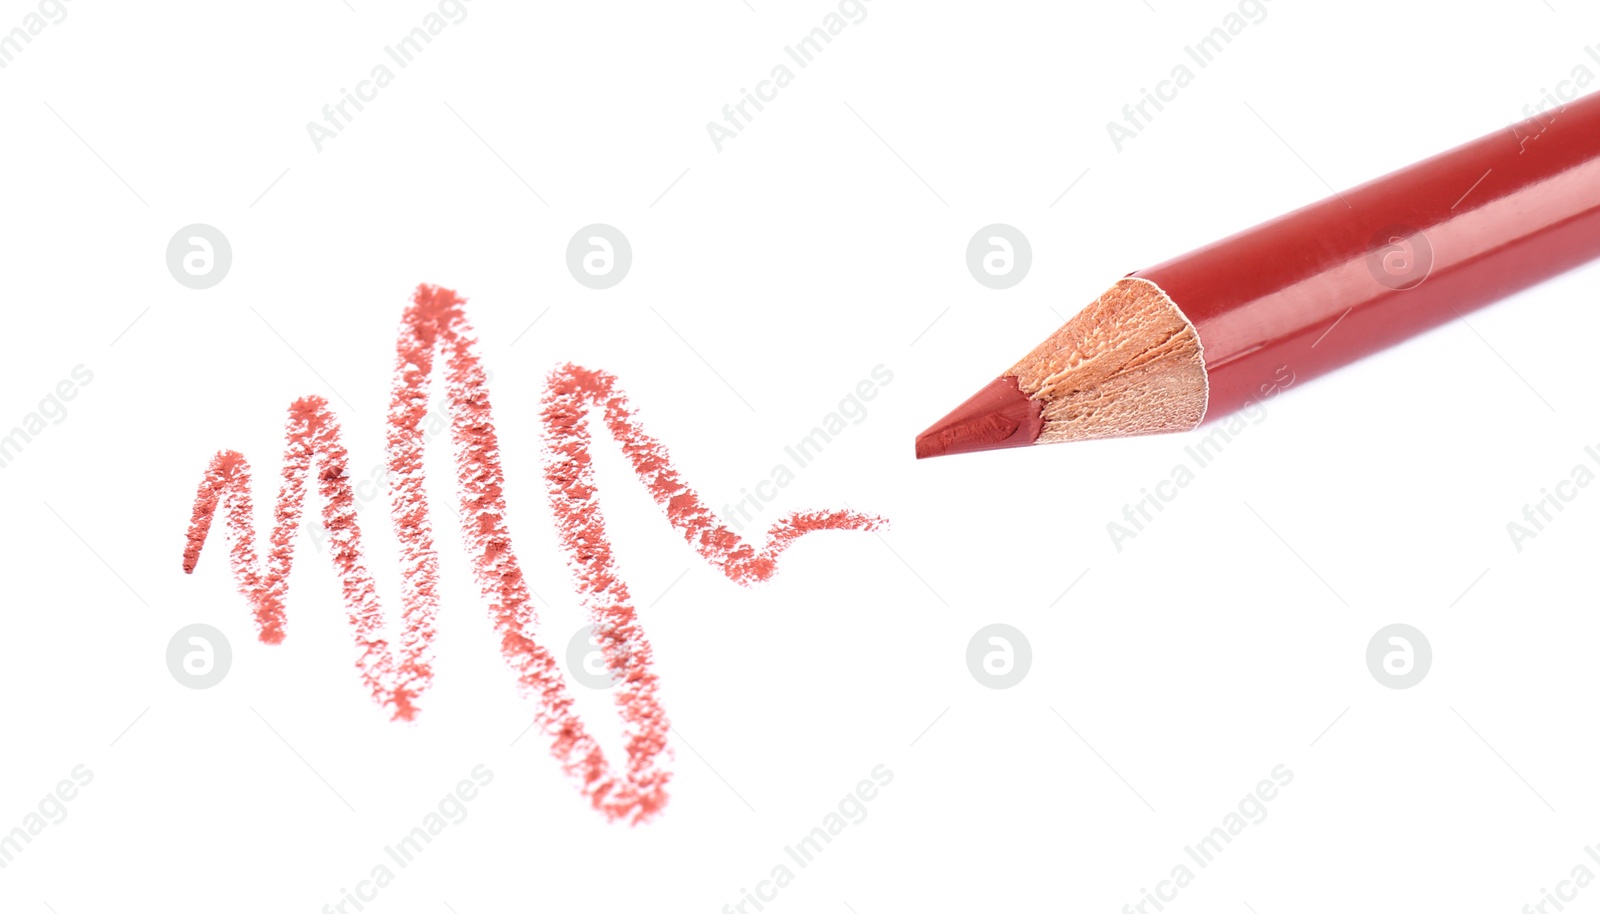 Photo of Bright lip liner stroke and pencil on white background